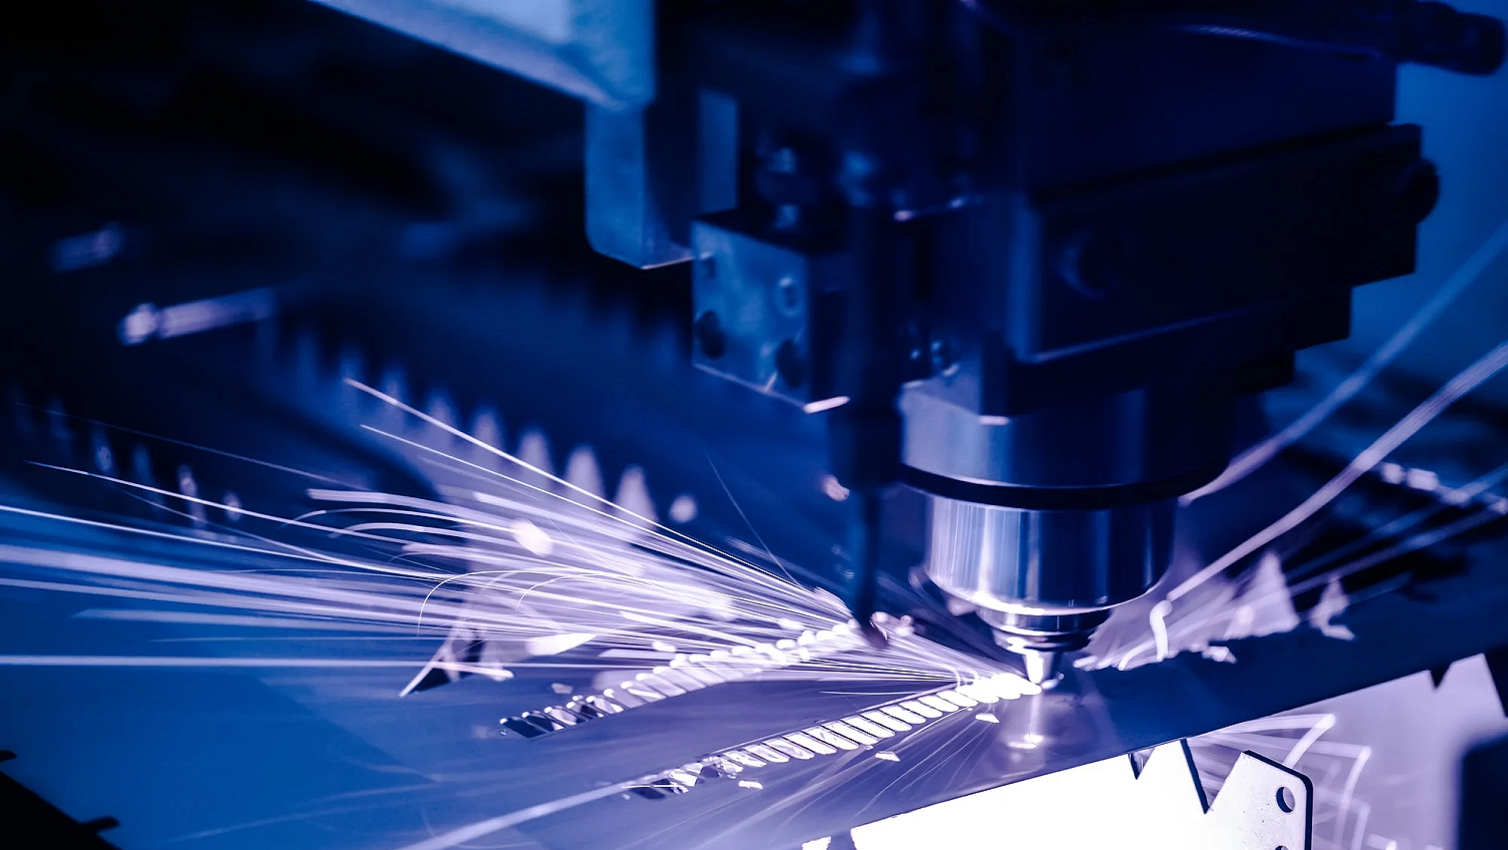 Parameters which influence the laser cutting process